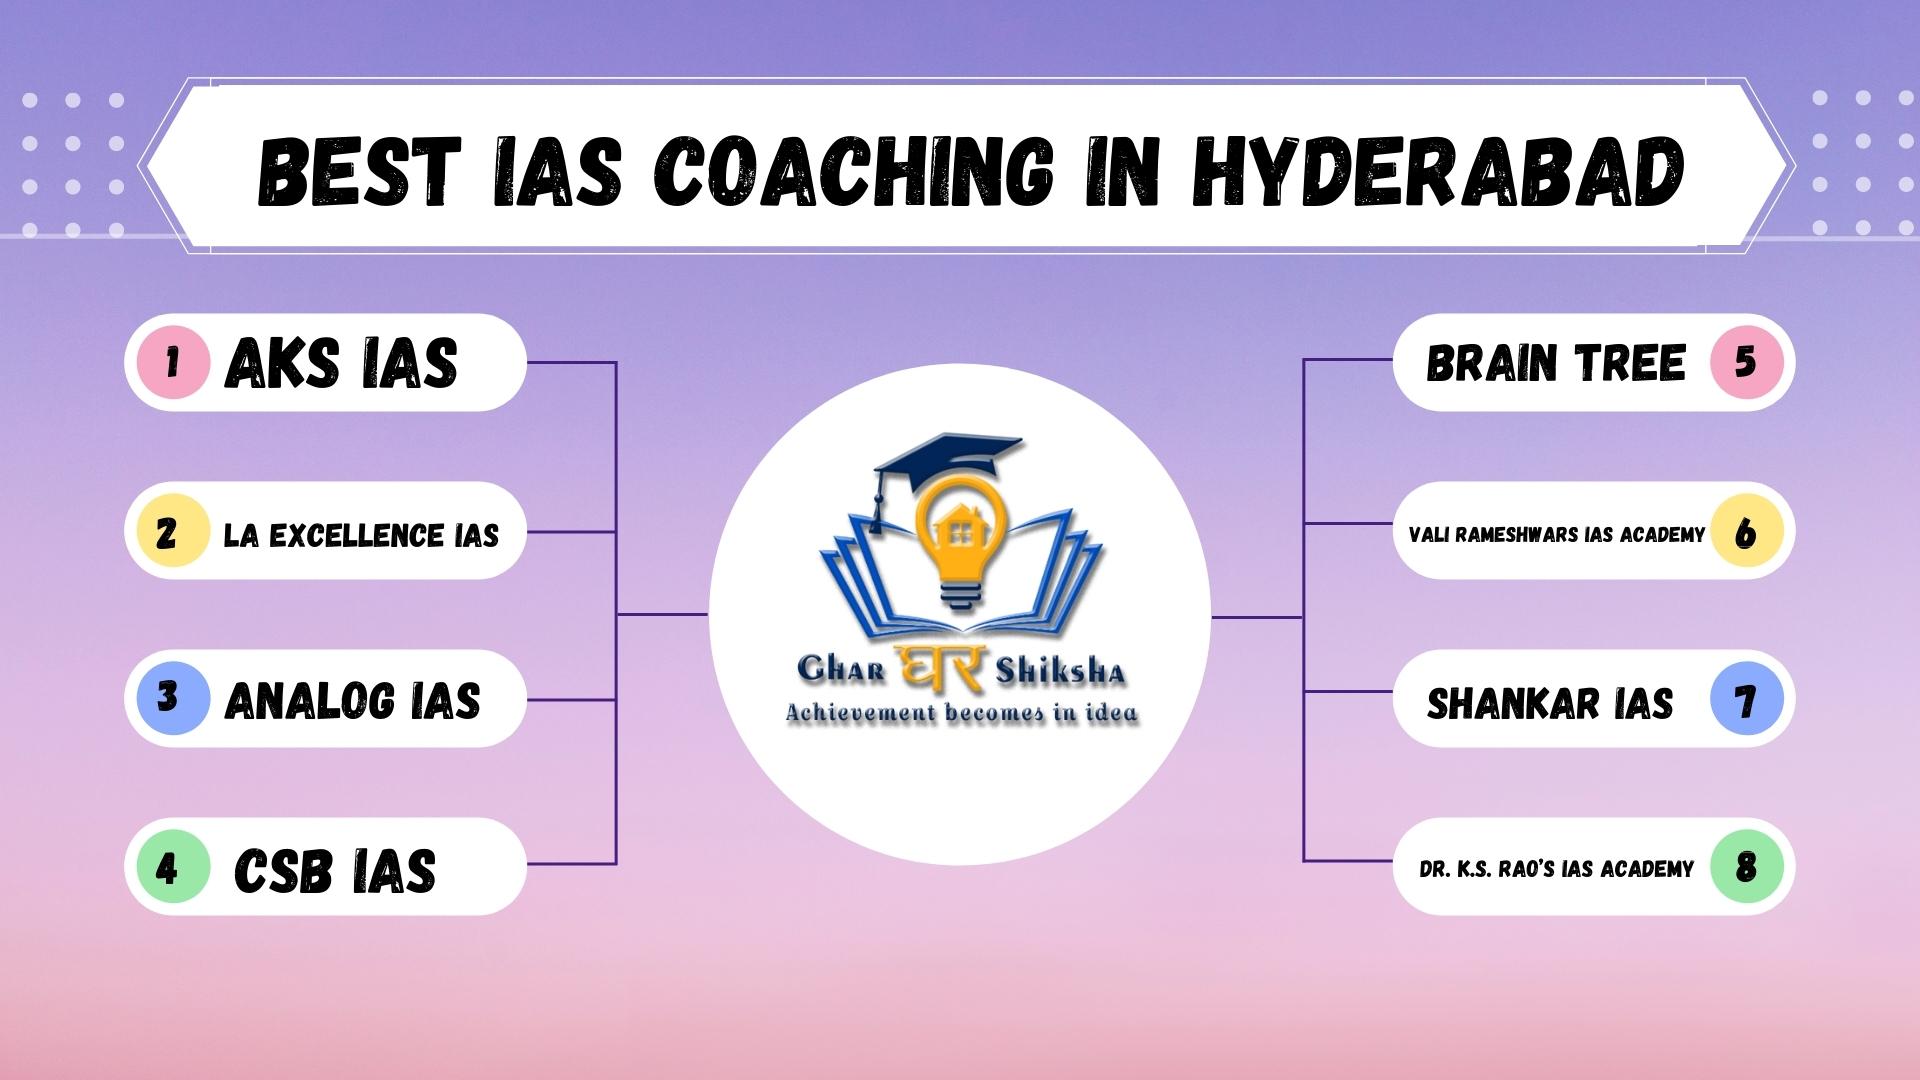 Best 10 IAS Coaching Centers In Hyderabad